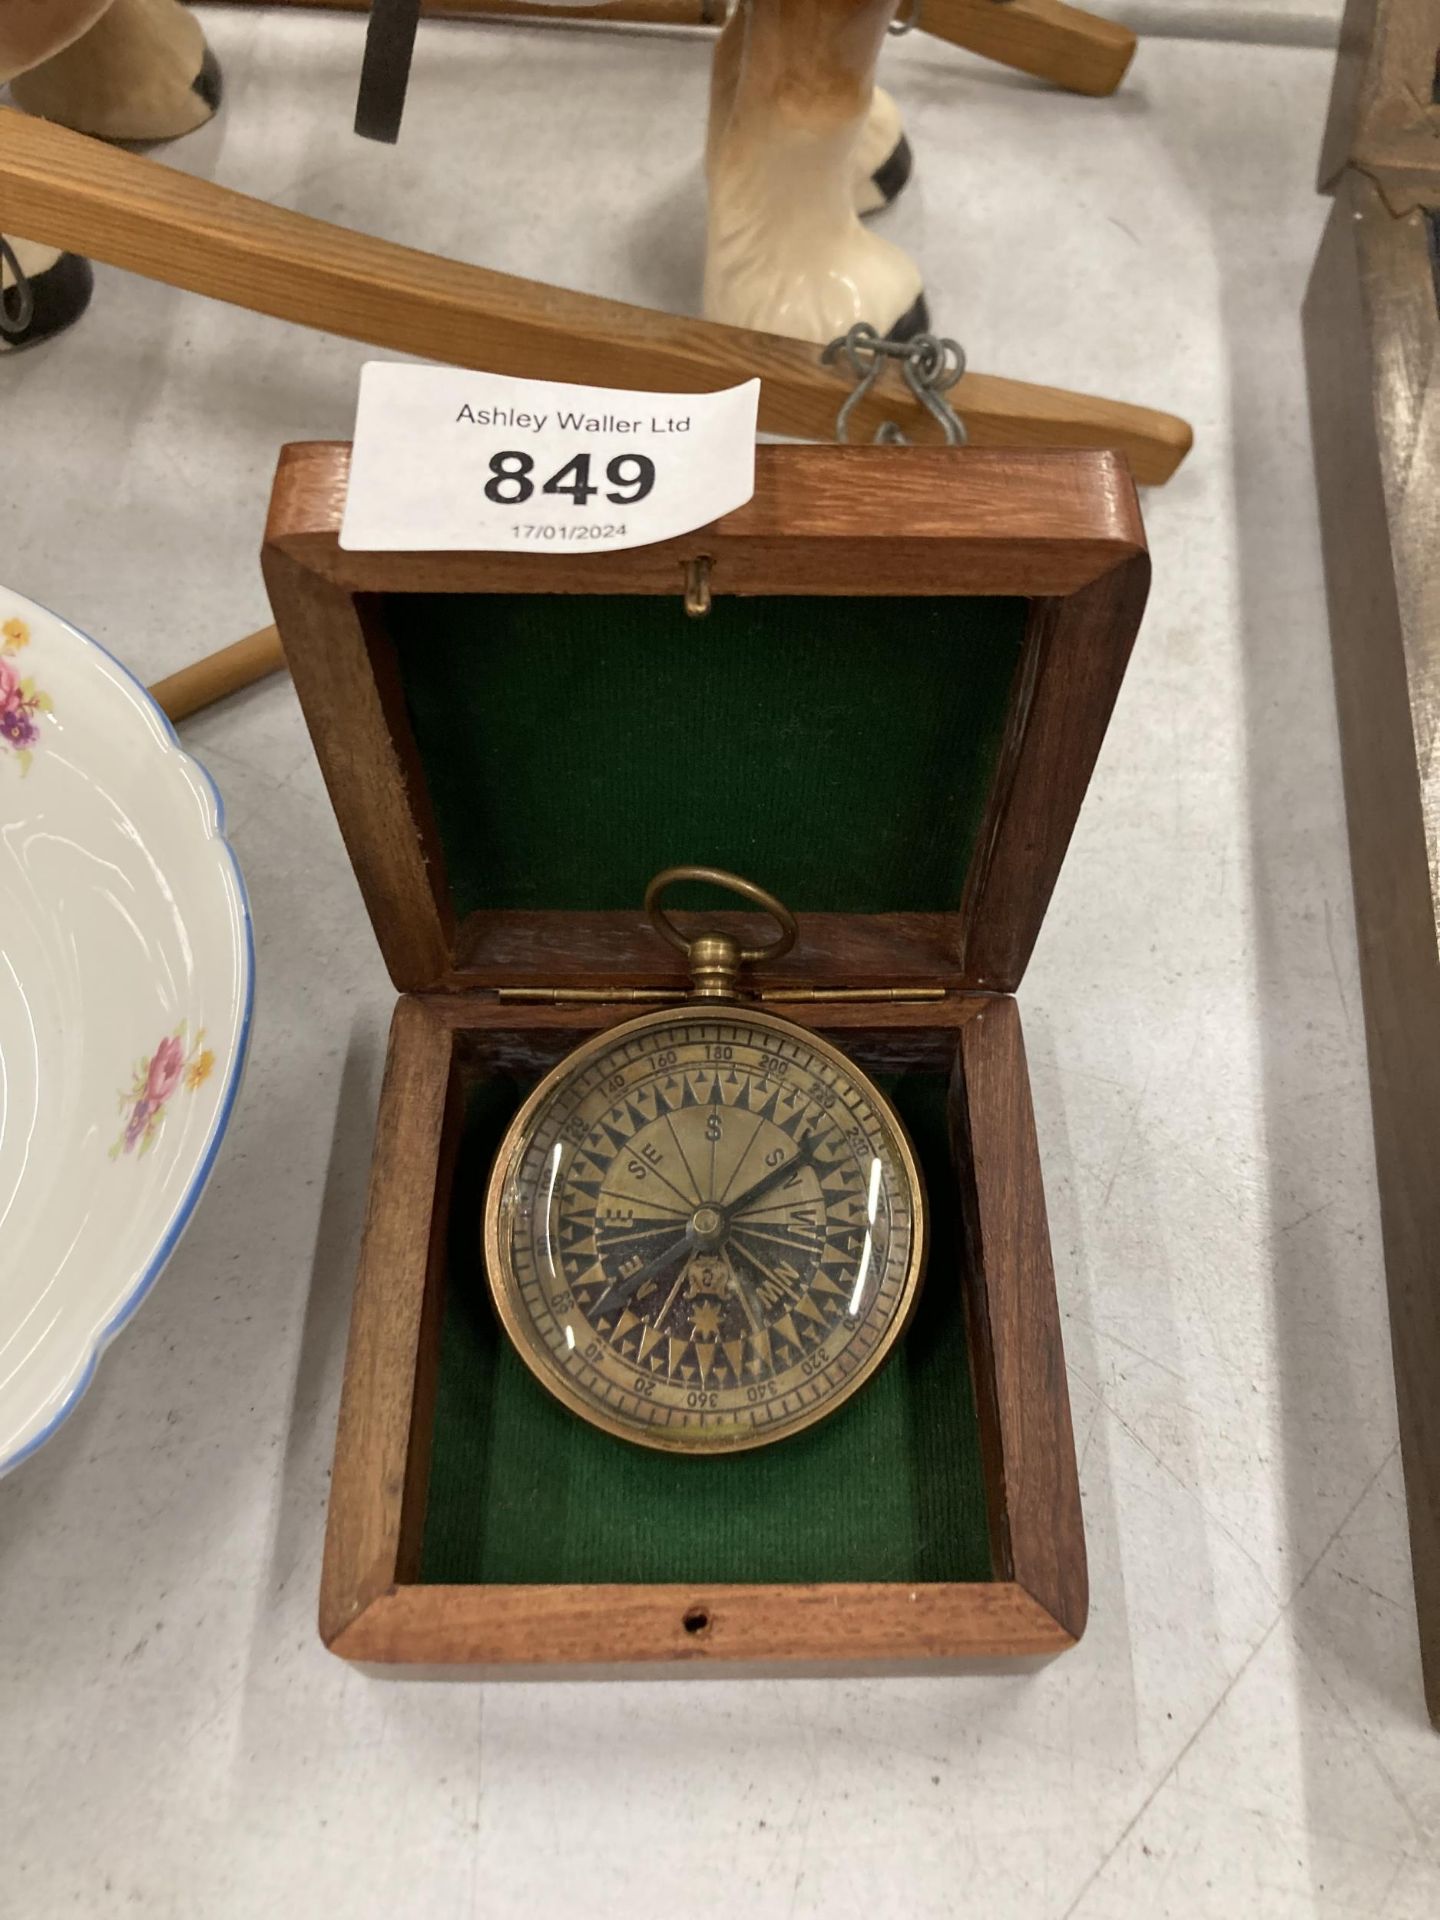 A VINTAGE STYLE 'MADE FOR ROYAL NAVY' COMPASS IN A WOODEN BOX